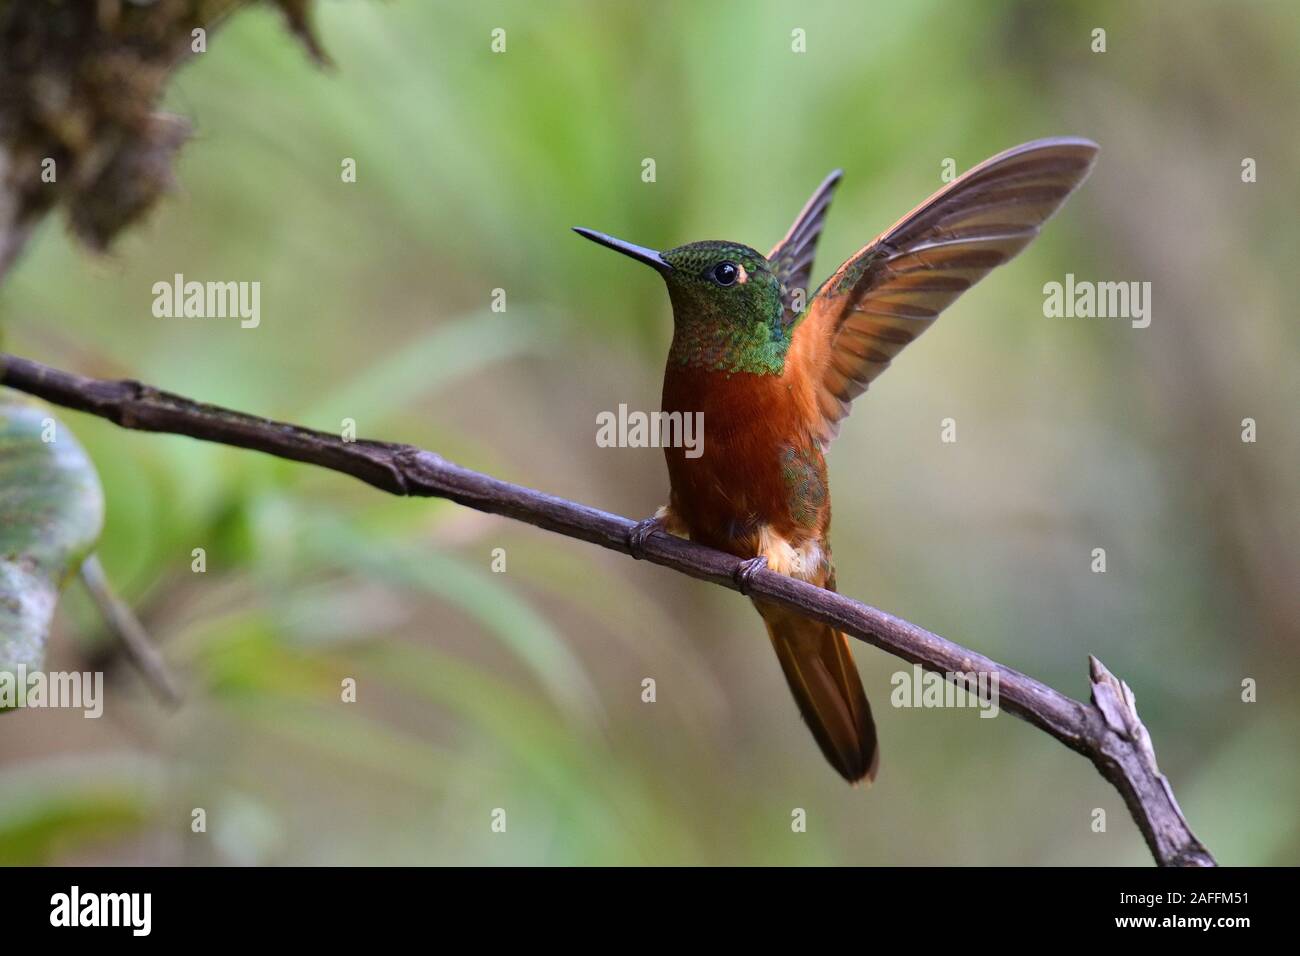 A Chestnut Breasted Coronet hummingbird in Peruvian Cloud forest Stock Photo